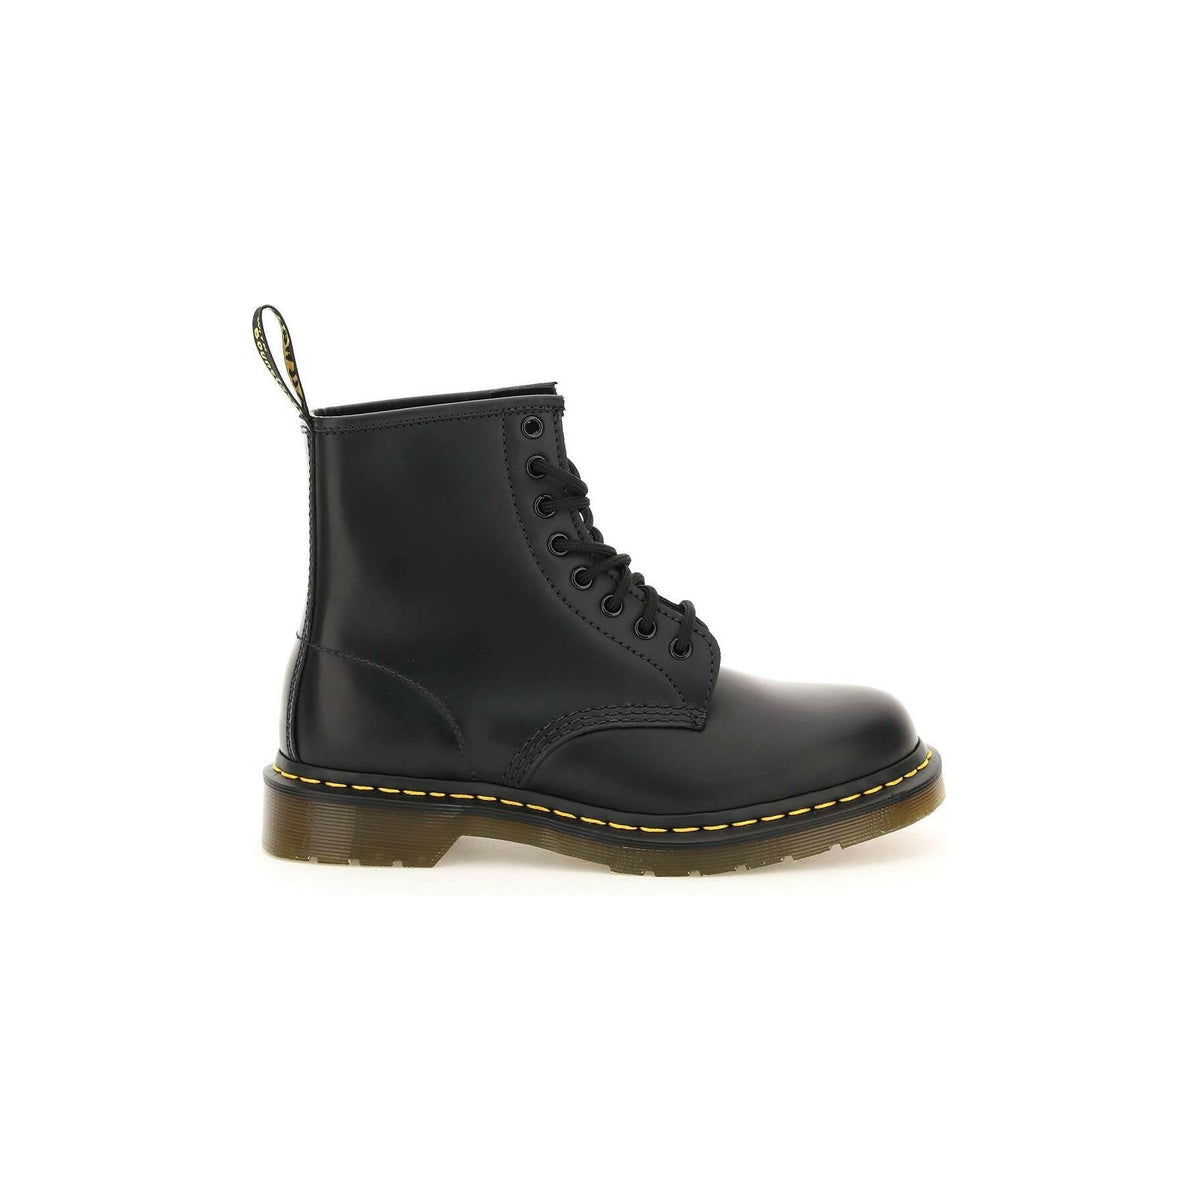 1460 Smooth Leather Combat Boots DR.MARTENS JOHN JULIA.